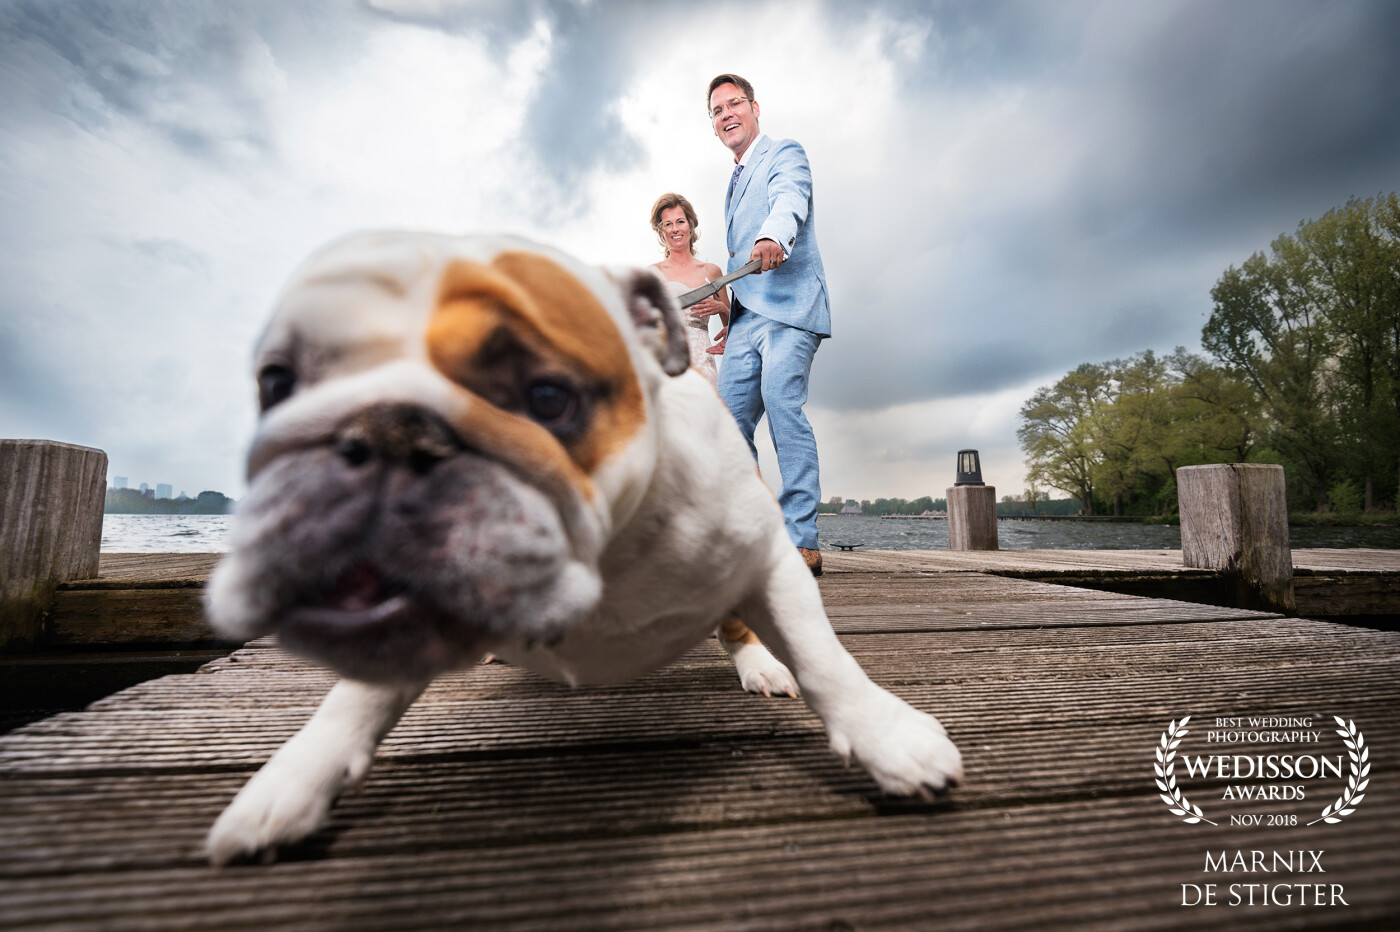 This amazing bulldog (called Yoda) was so curious that he wanted to get as close to the lens as possible. Taken at 16mm, about 10 centimeters away from his nose :)